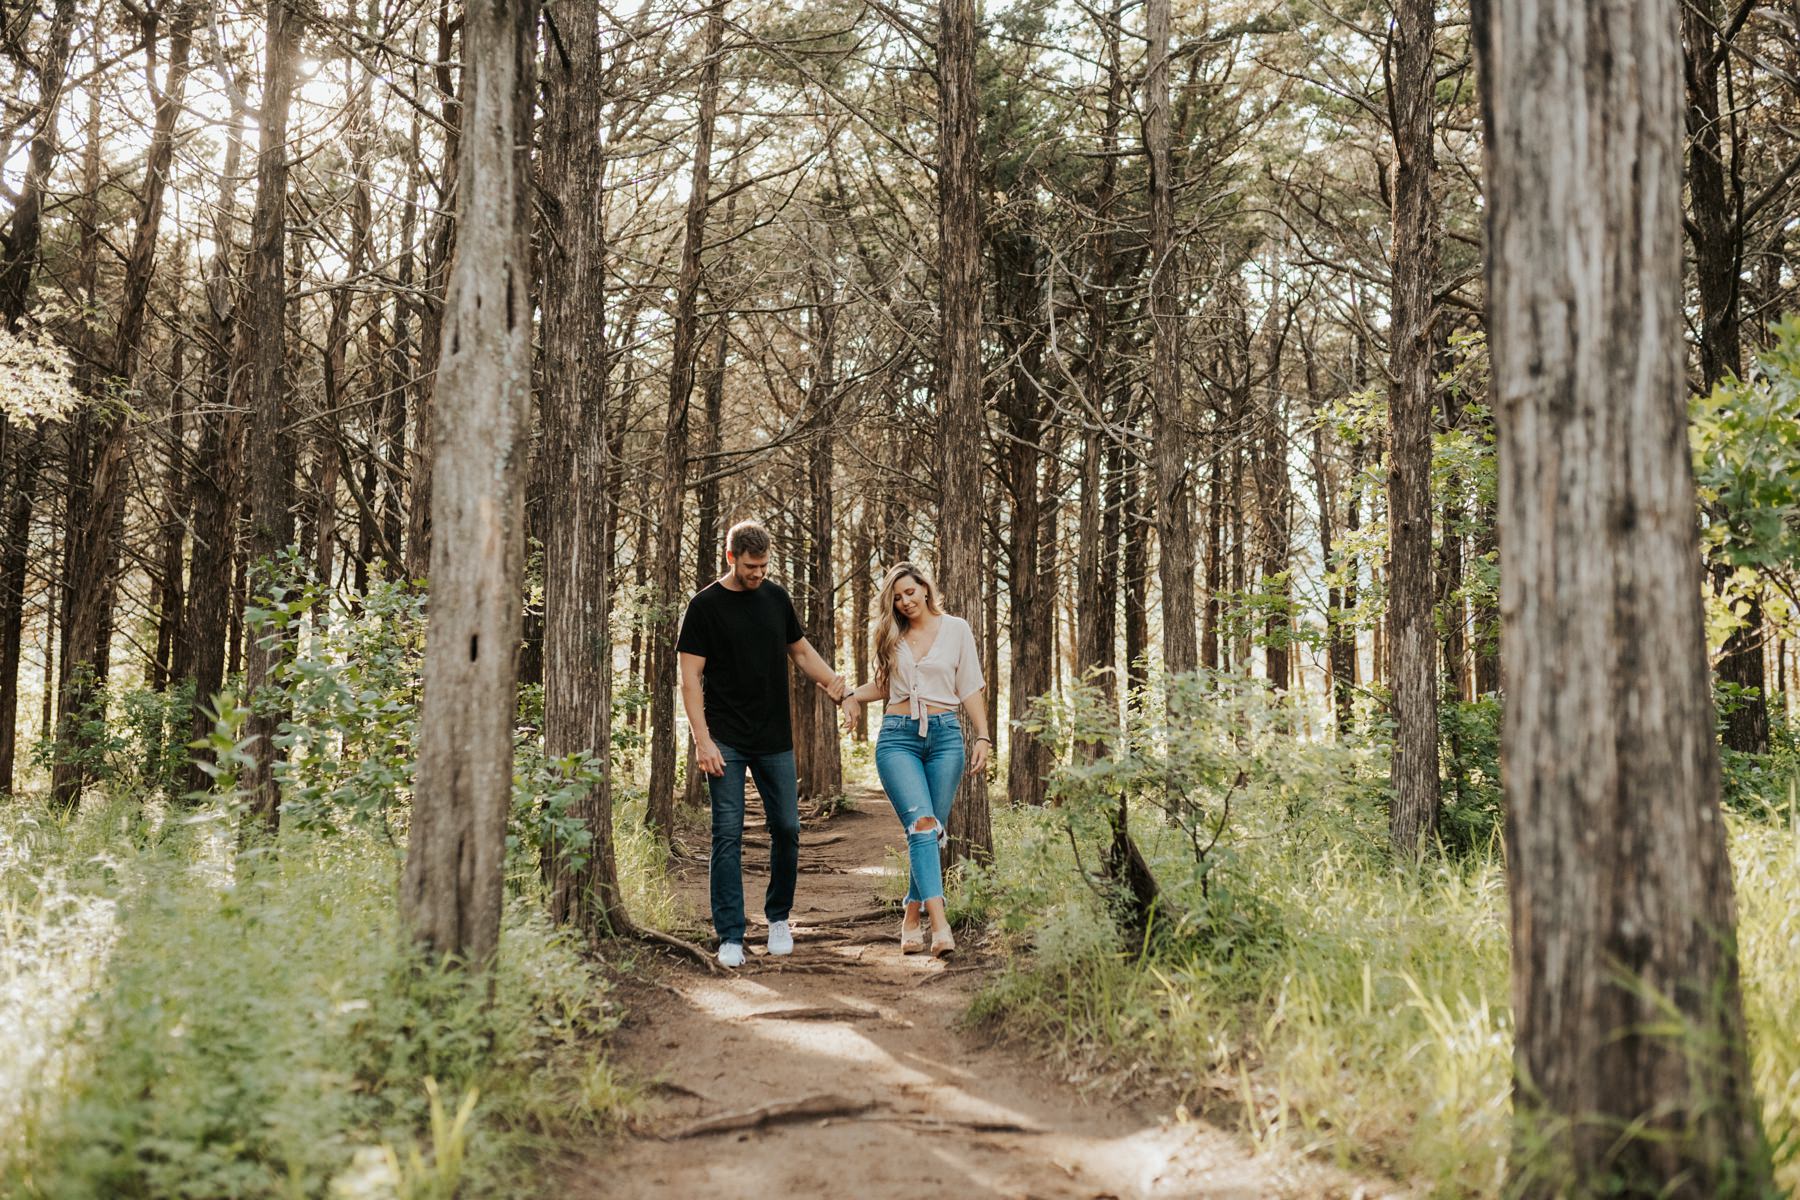 A couple walking in the Parallel Forest in the Wichita Mountains.